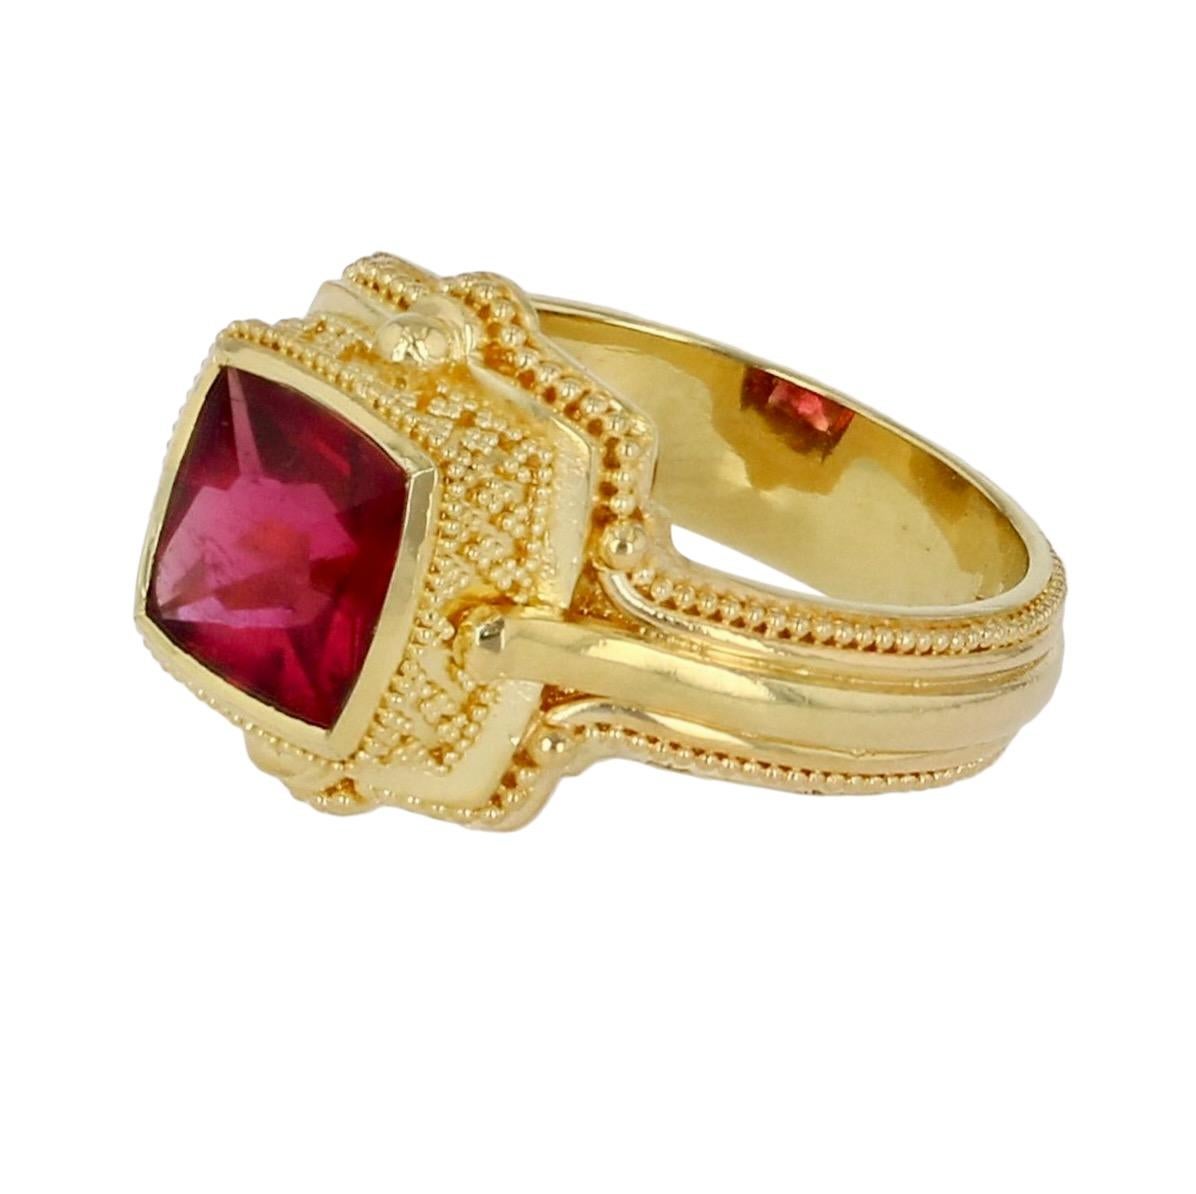 Kent Raible's square cushion cut Rubellite ring is a knock out! The gem is lively displaying reds and magentas. The artistry and craftsmanship are impeccable. Hand made by the artist himself, Raible has added layers, lines of elegant curves and fine